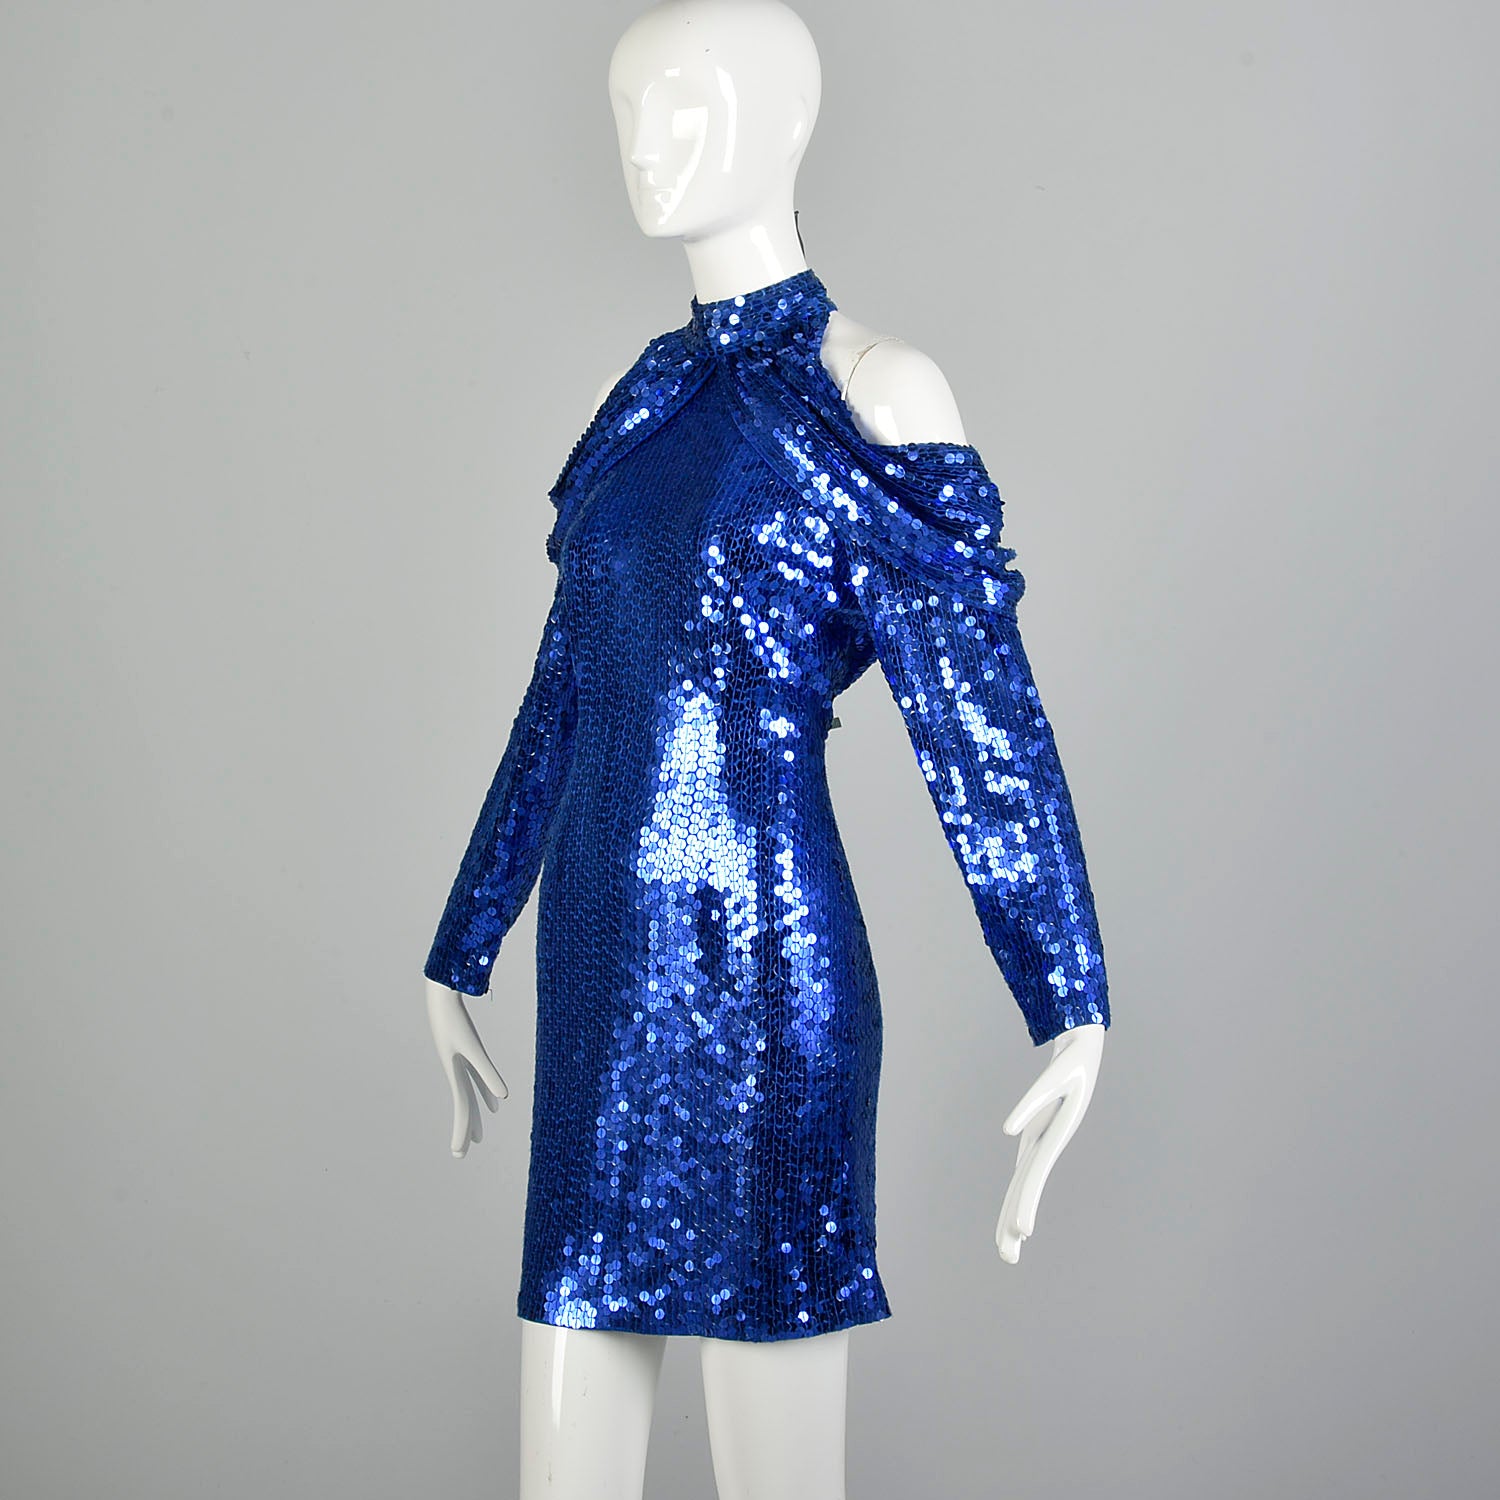 Small 1990s Blue Sequin Body Con Party Dress Long Sleeve Mini Dress Cold Shoulder Dress